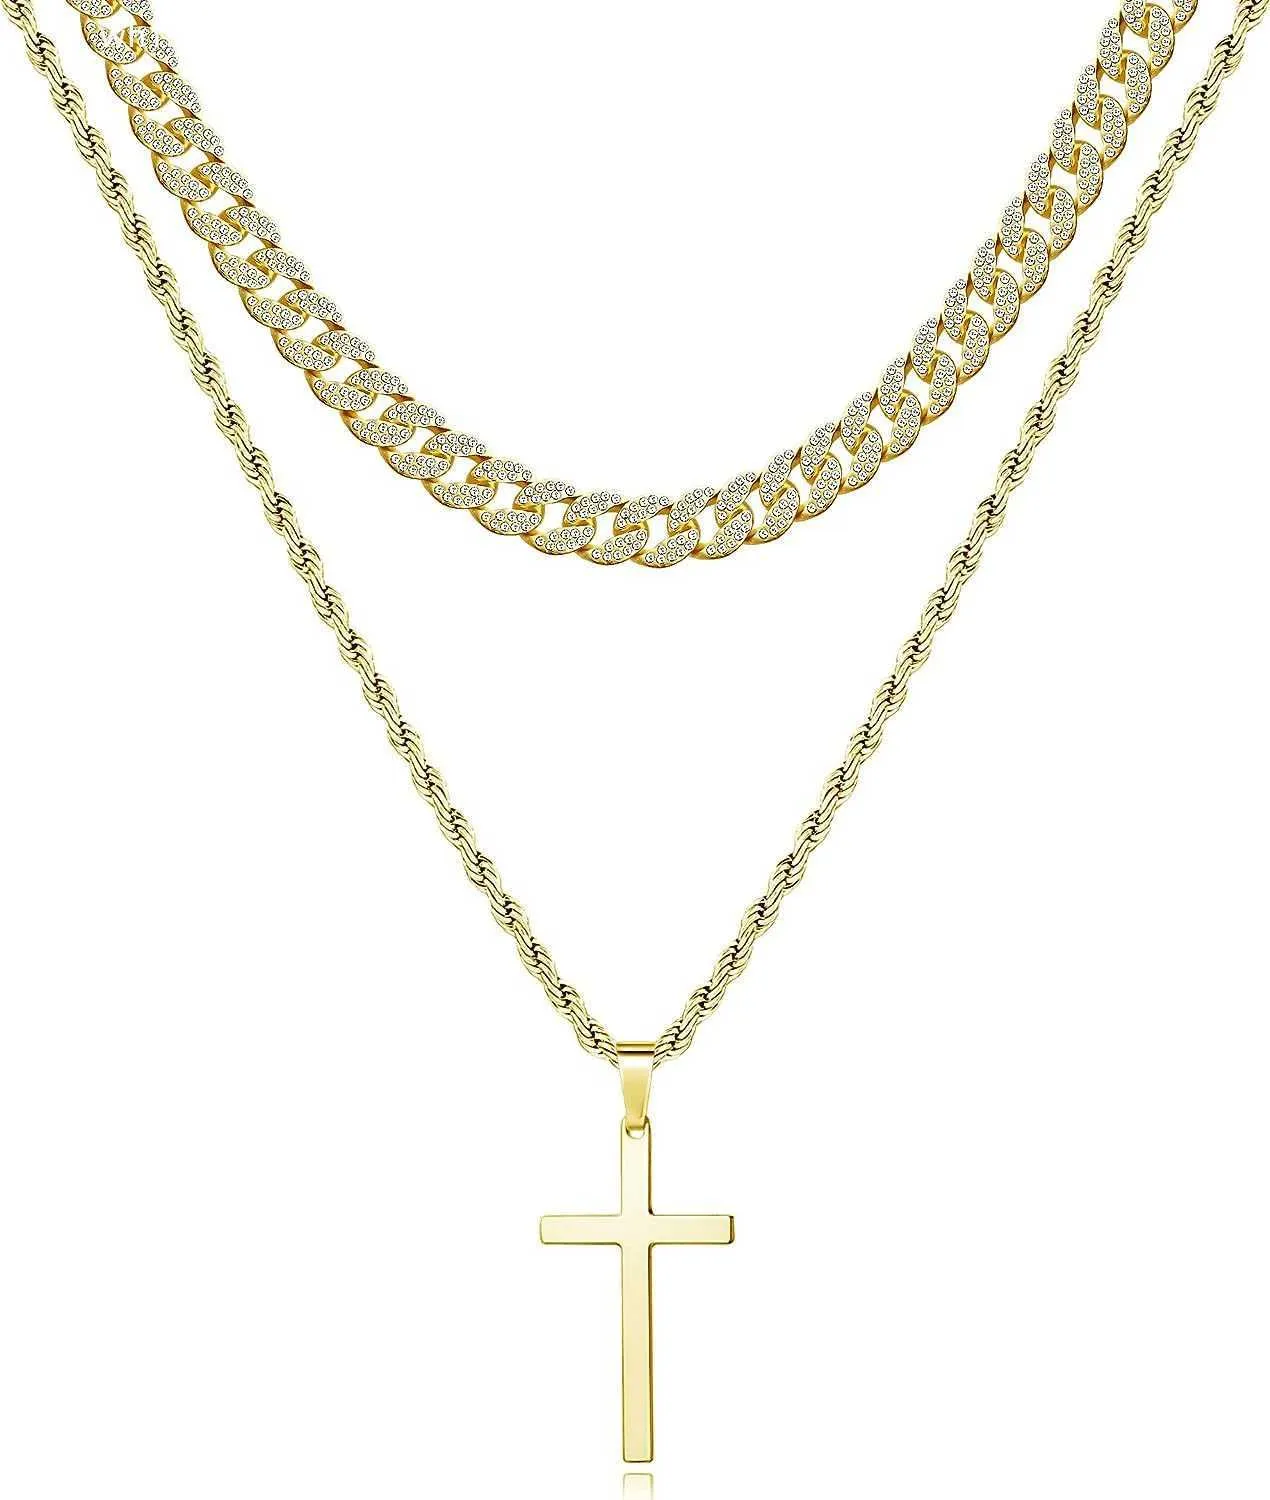 Layered Cross Necklace Chain for Men Gold Black Silver Chains Cuban Twist Rhinestone Cross Necklaces Chains Stainless Steel Chunky Choker Link Chain 14K Golden Plat